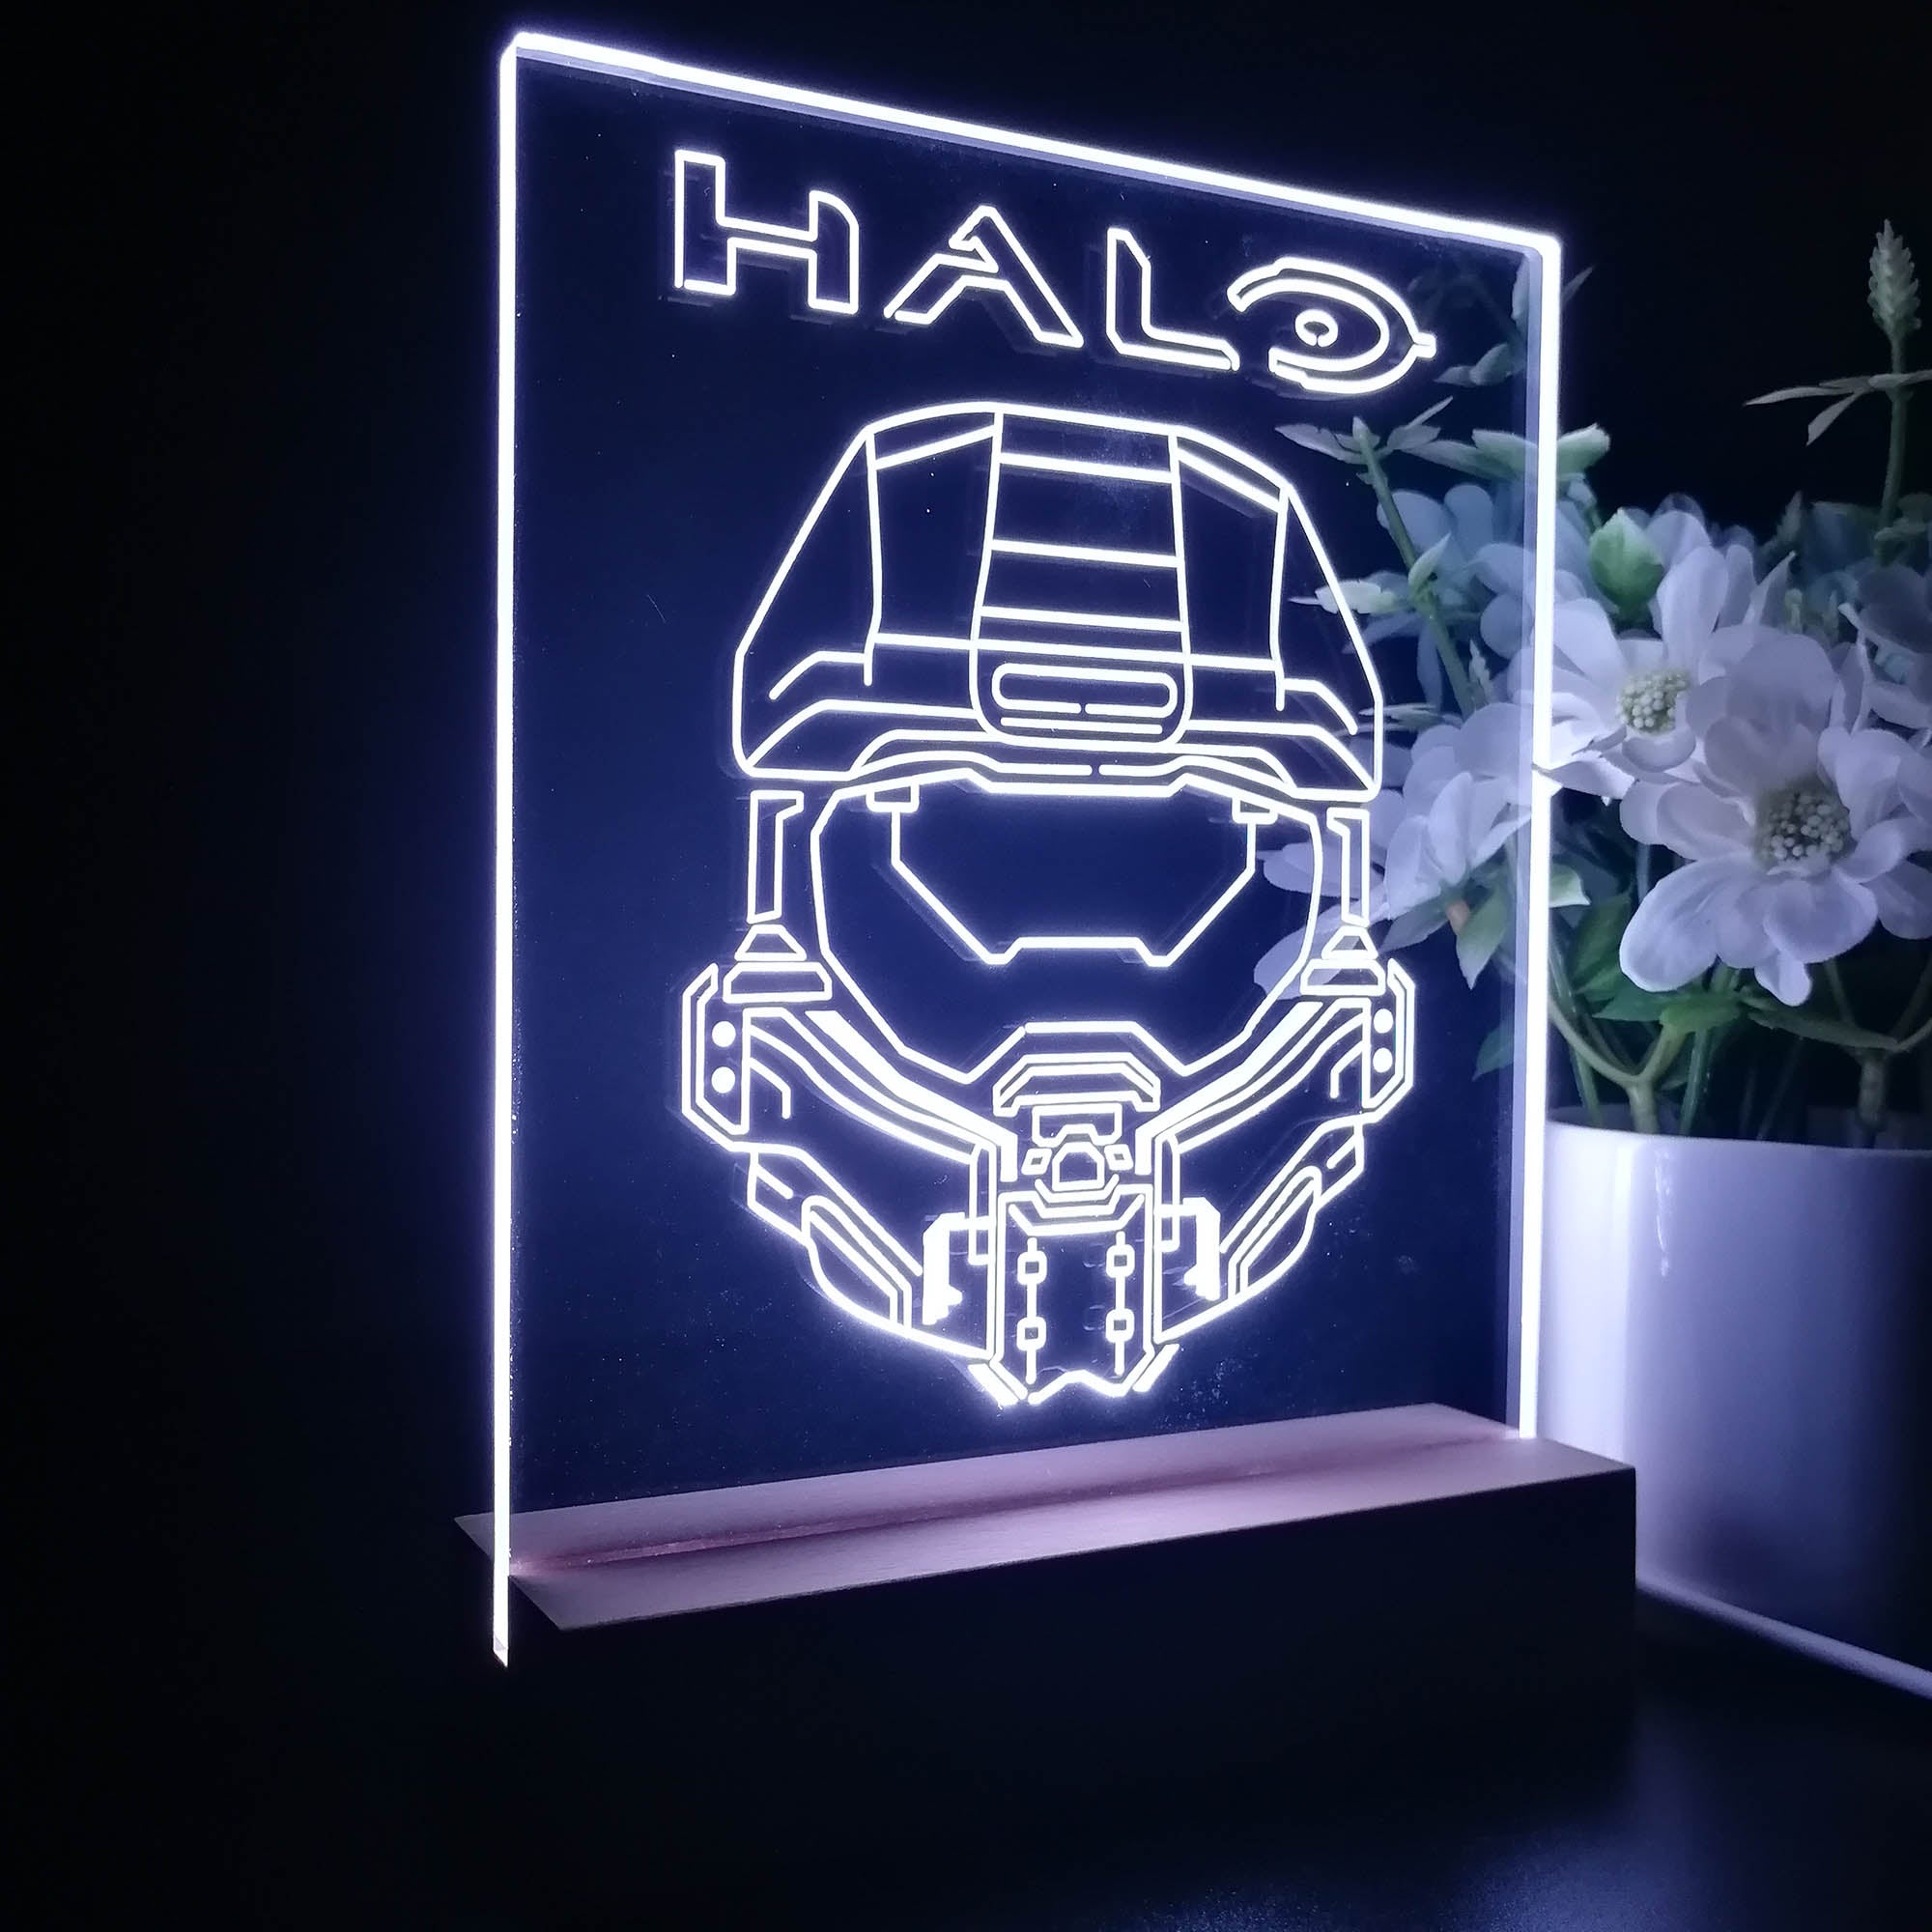 Halo Master Chief 3D Neon LED Night Light Sign Table Lamp